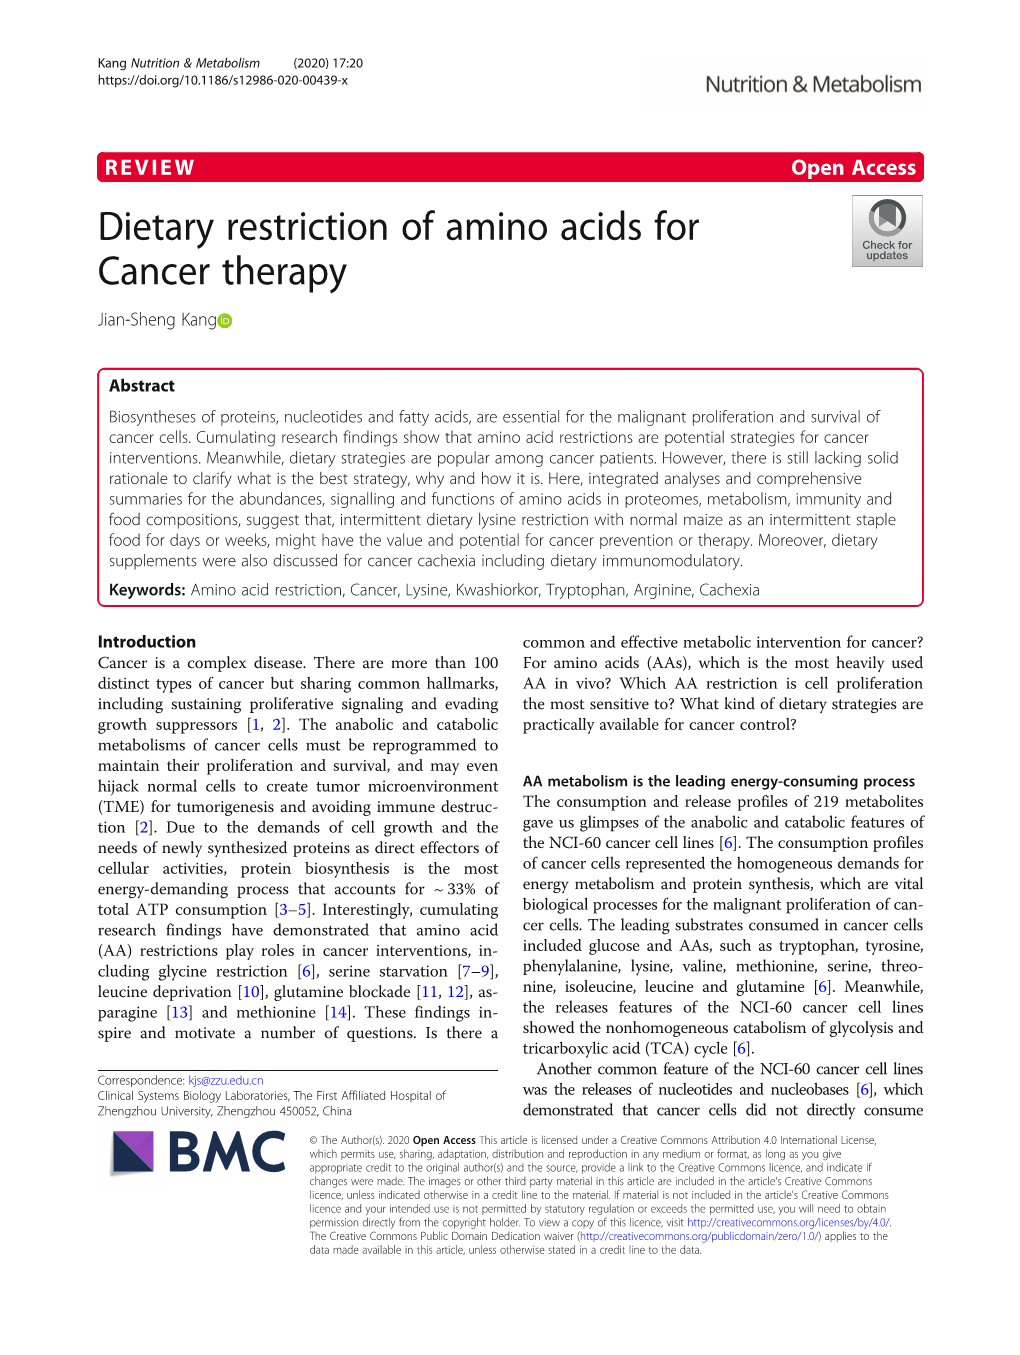 Dietary Restriction of Amino Acids for Cancer Therapy Jian-Sheng Kang